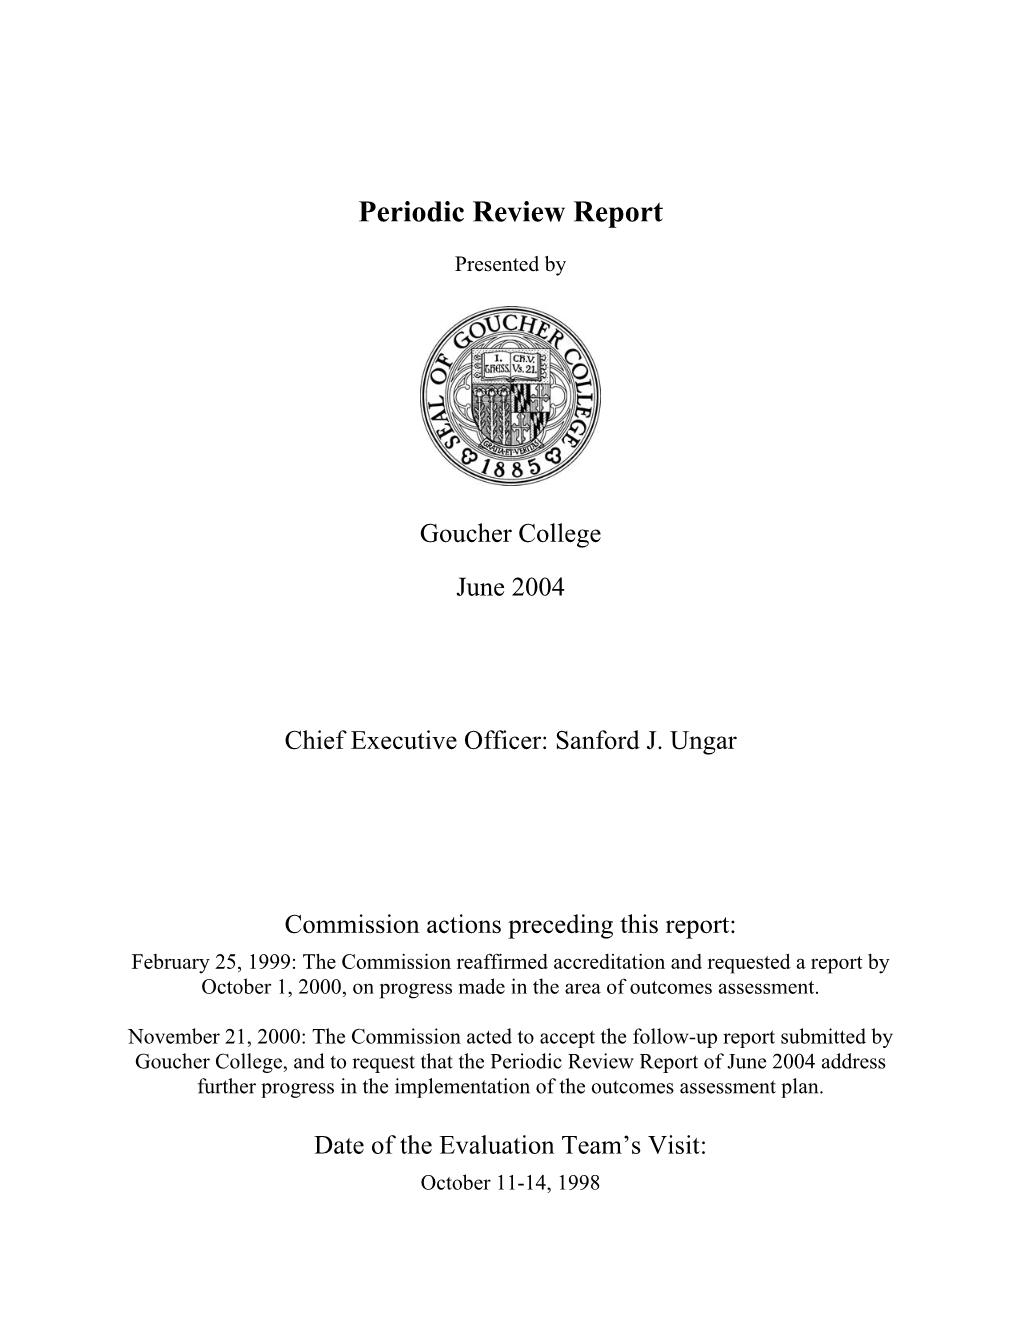 Goucher College Periodic Review Report